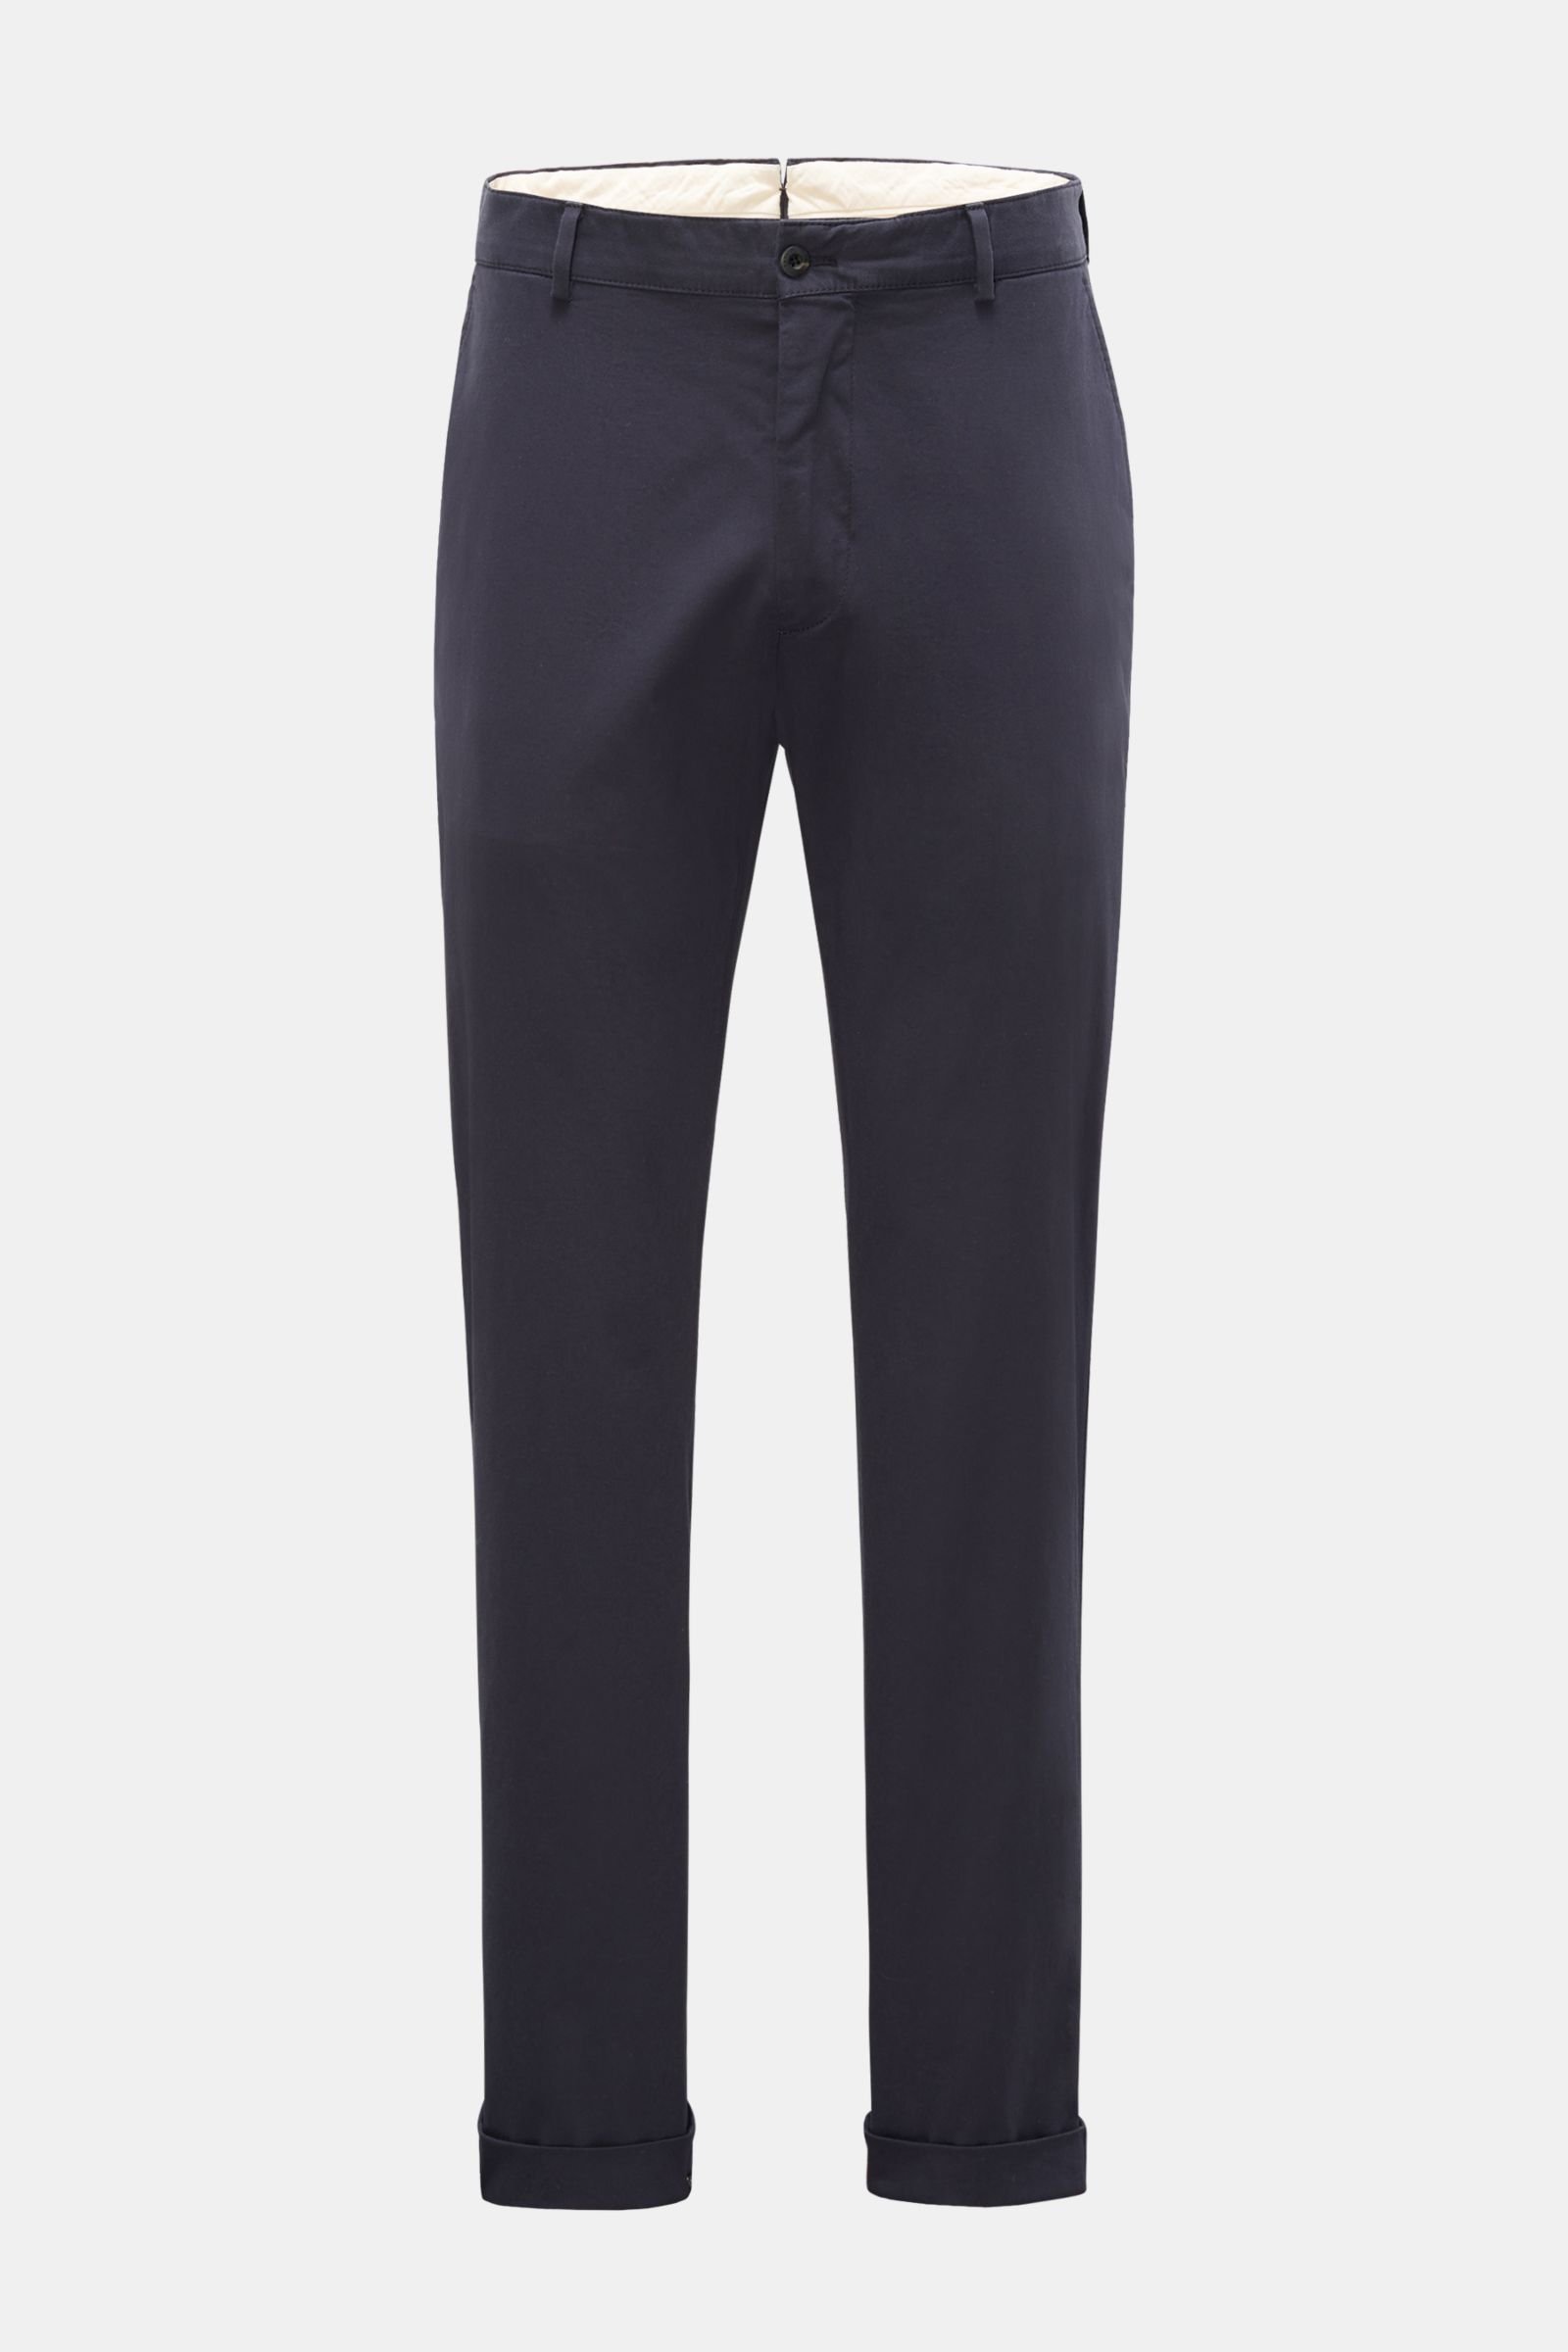 Cotton trousers navy